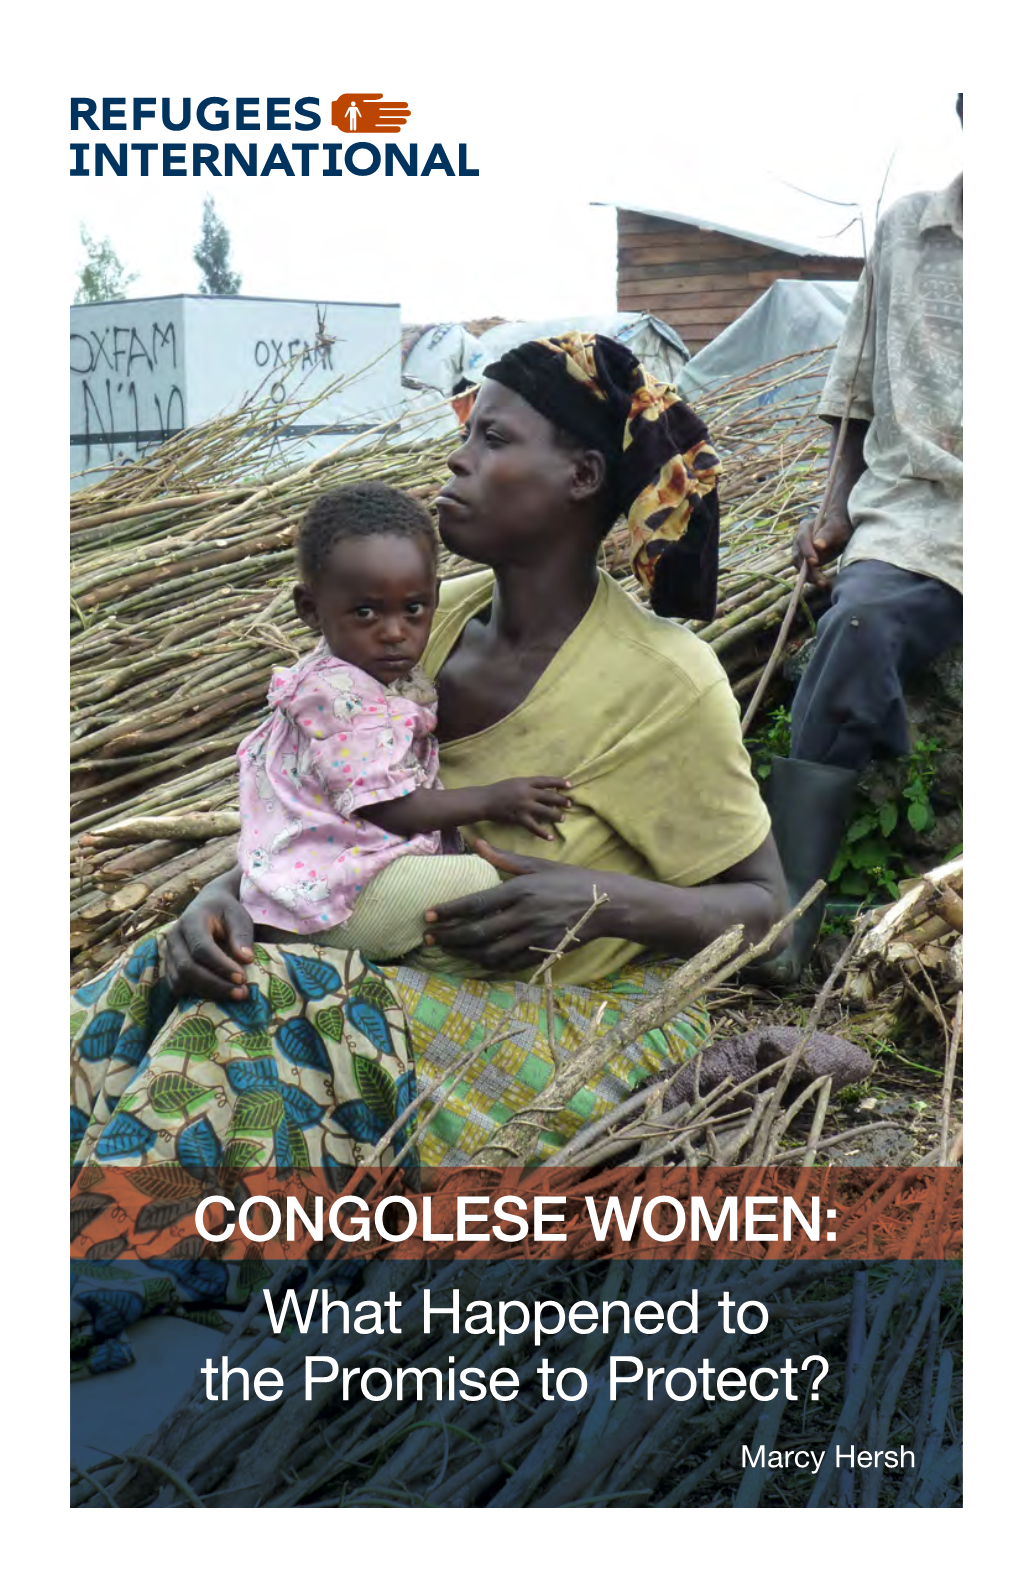 CONGOLESE WOMEN: What Happened to the Promise to Protect? Marcy Hersh